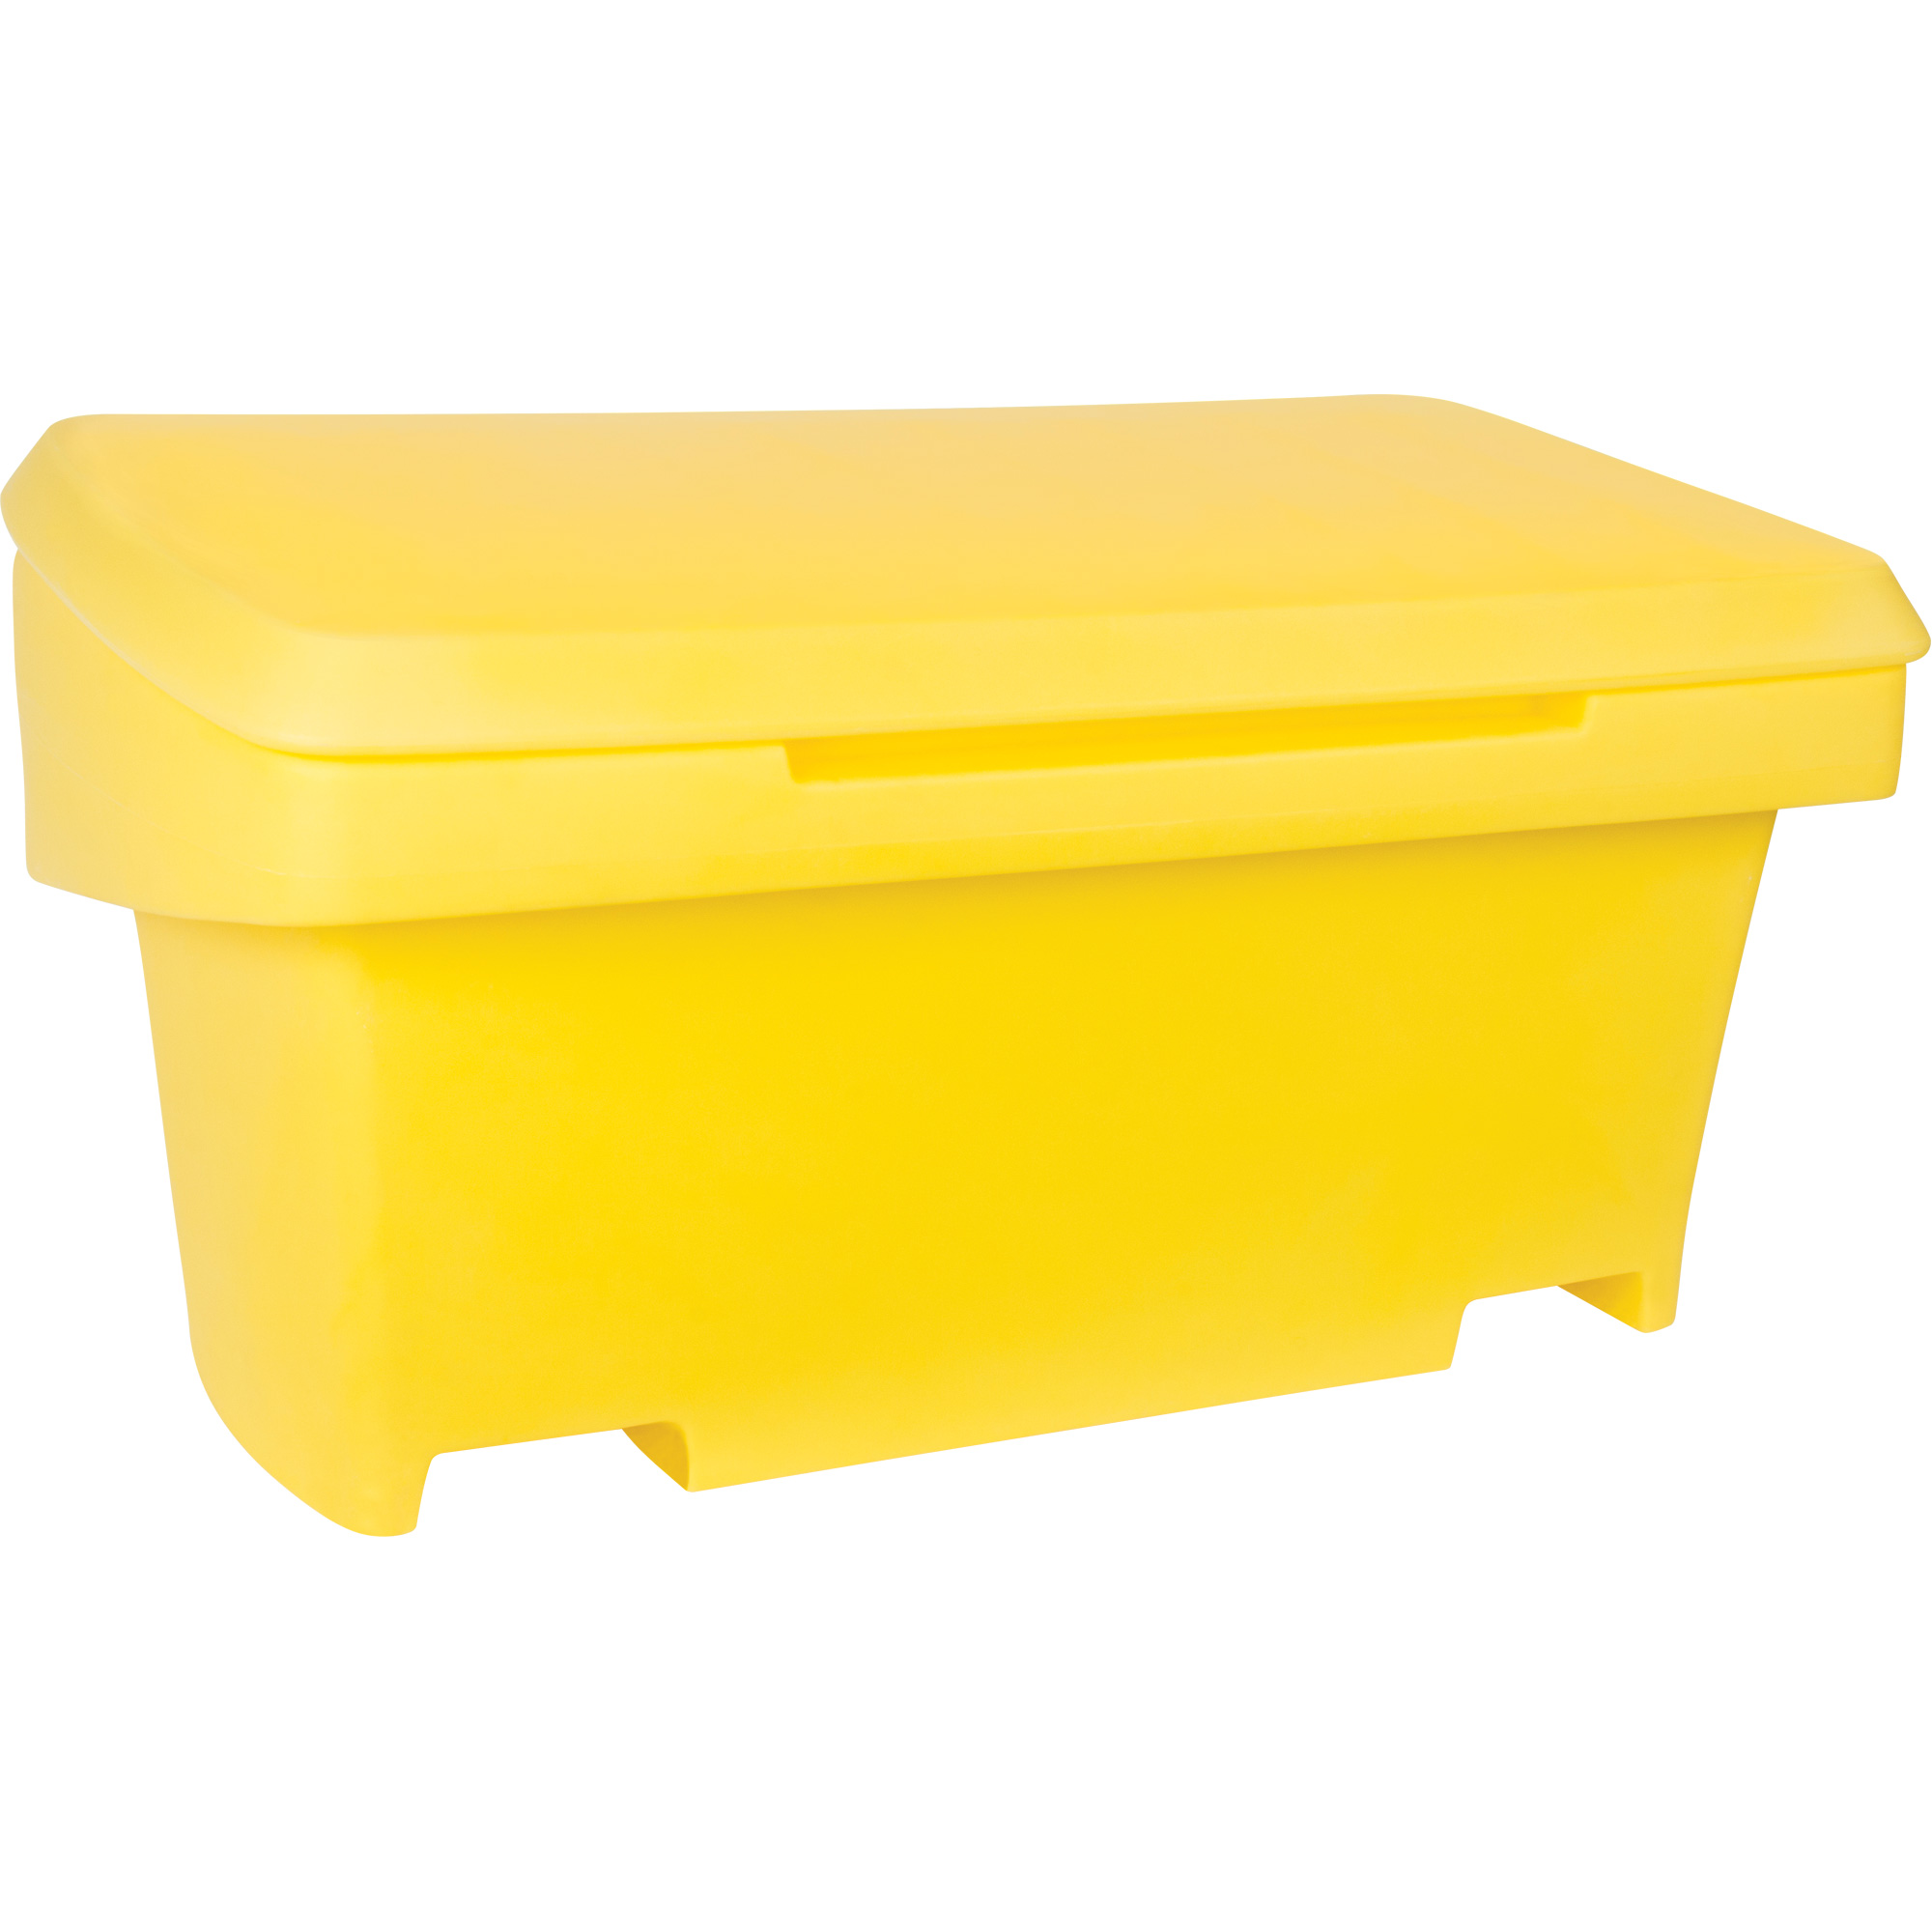 NM947 Heavy-Duty Outdoor Salt and Sand Storage Container, 24 x 48 x 24,  10 cu. Ft., Yellow